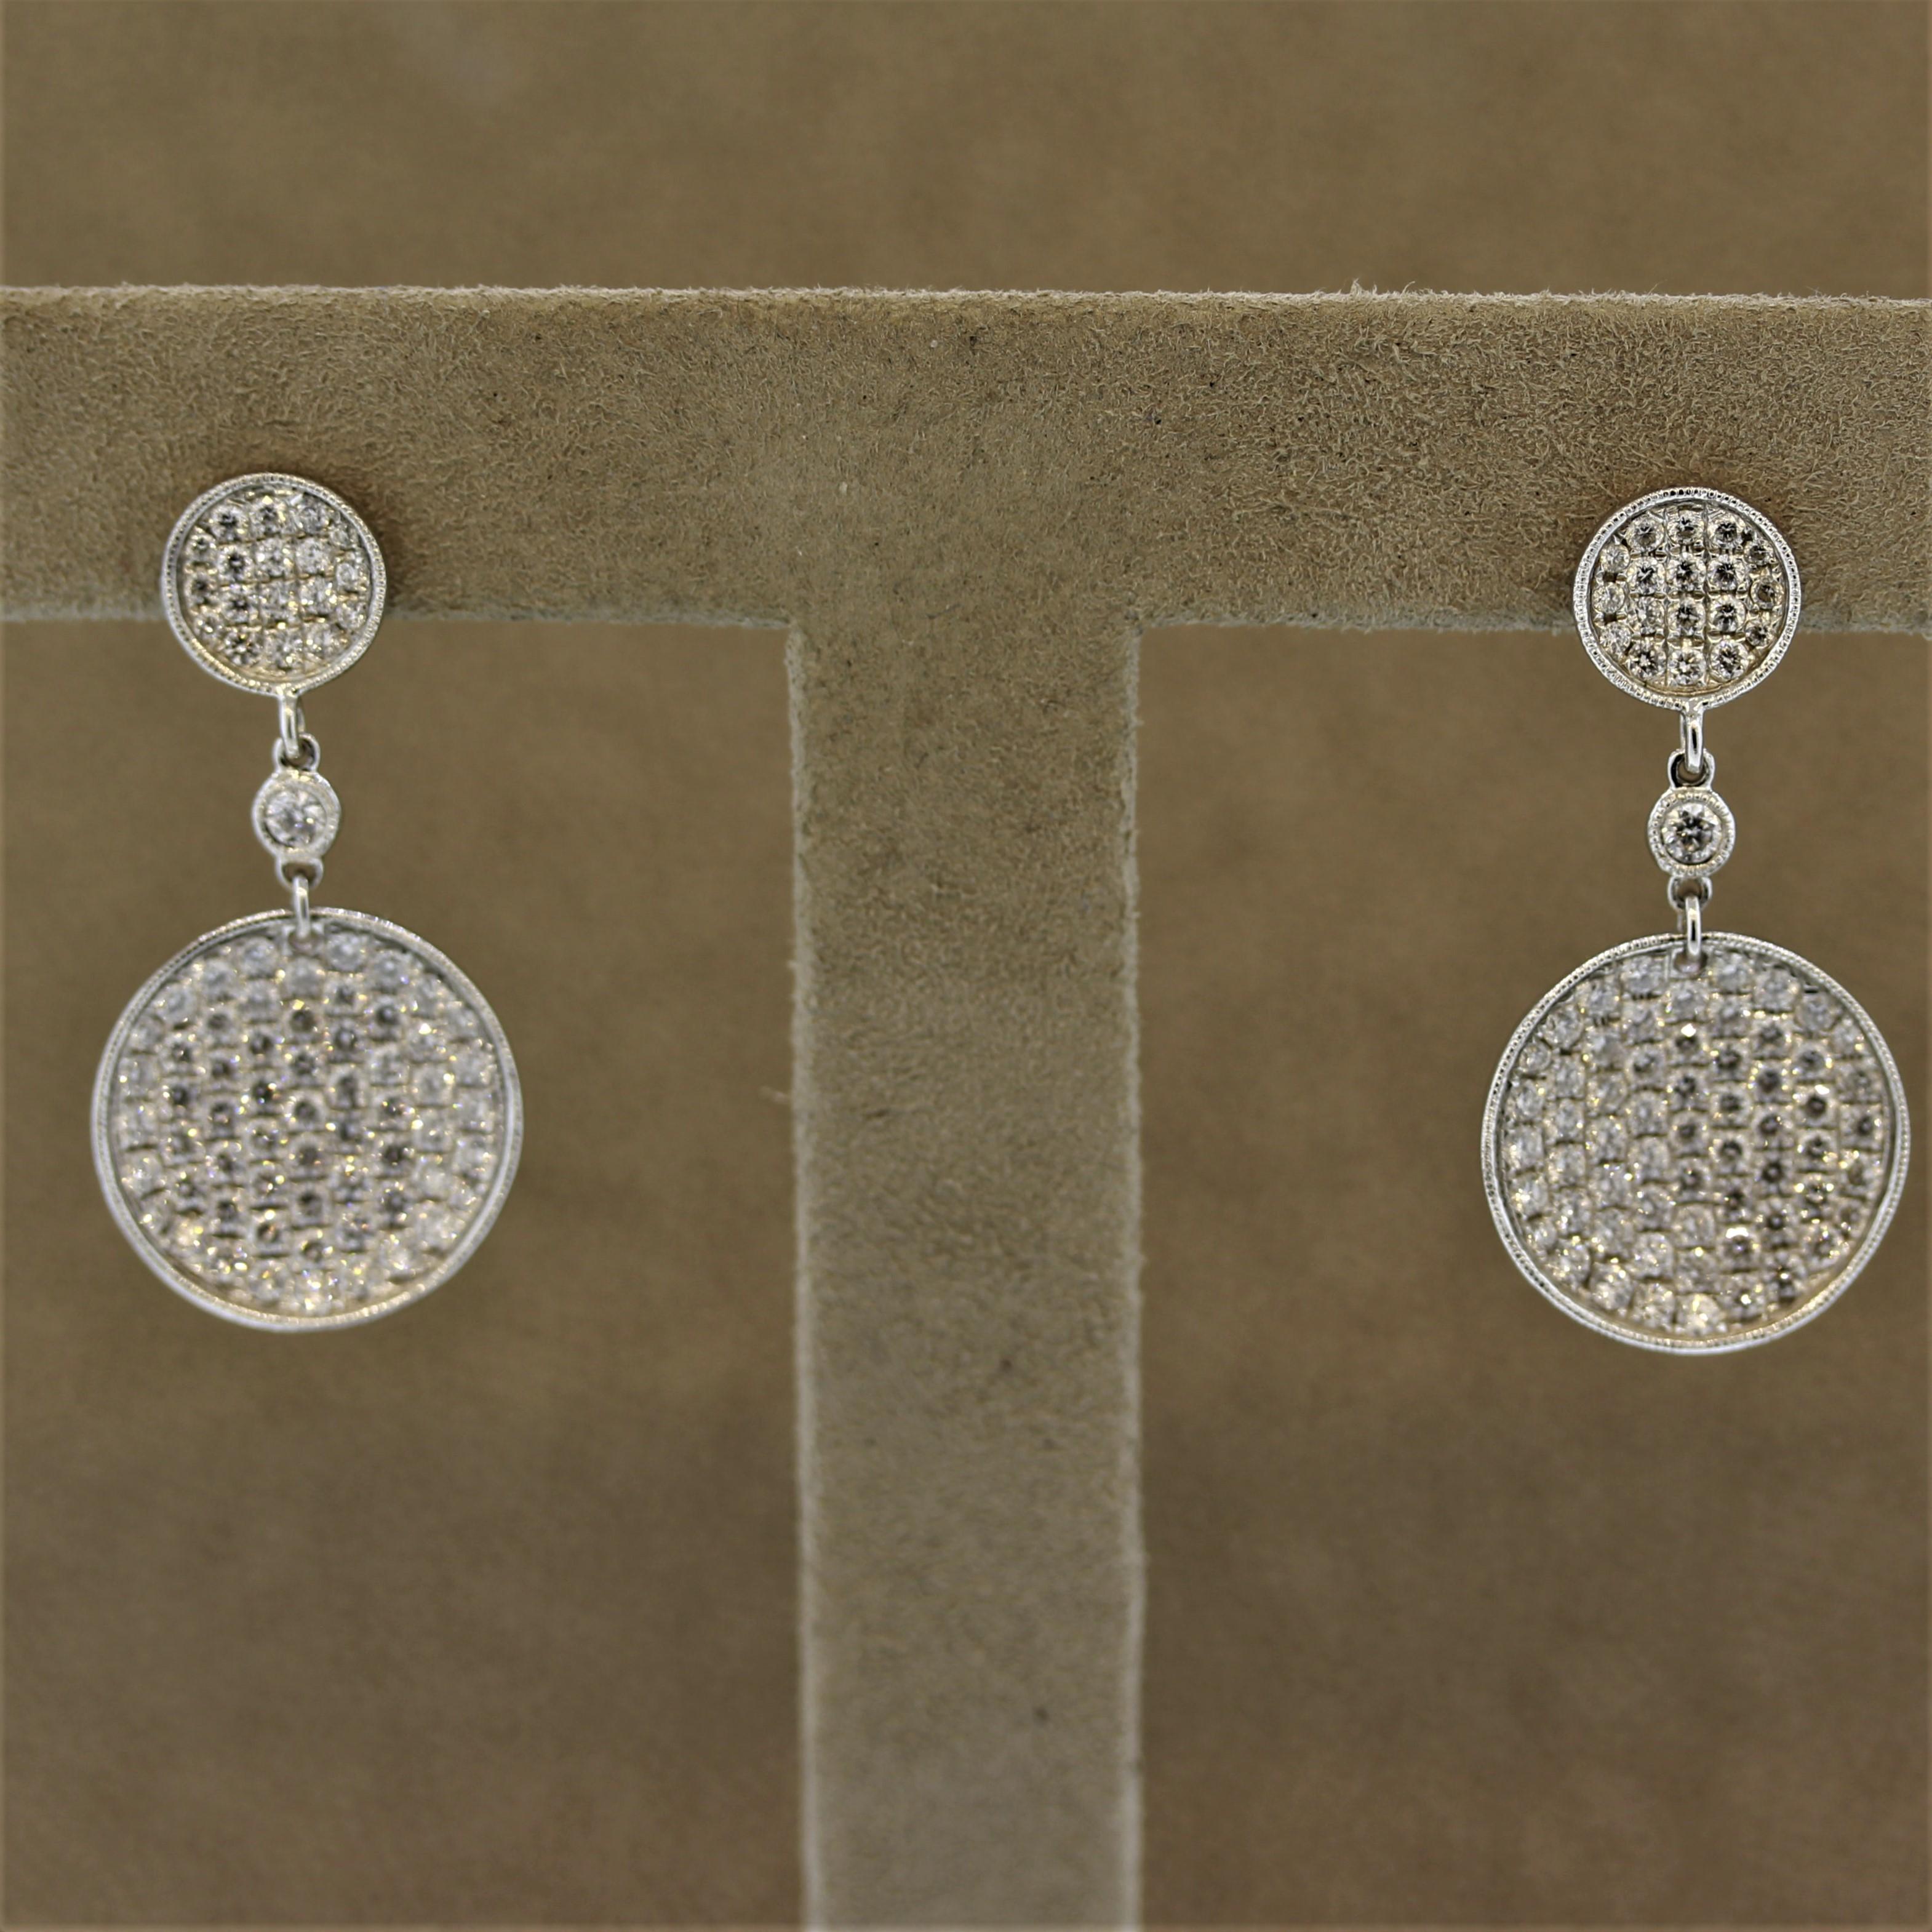 A chic and stylish pair of drop earrings featuring 2.32 carats of round brilliant cut diamonds set on round discs of 18k white gold. The chain-drop between the two discs feature a larger round cut diamond which adds to the style. Can be worn